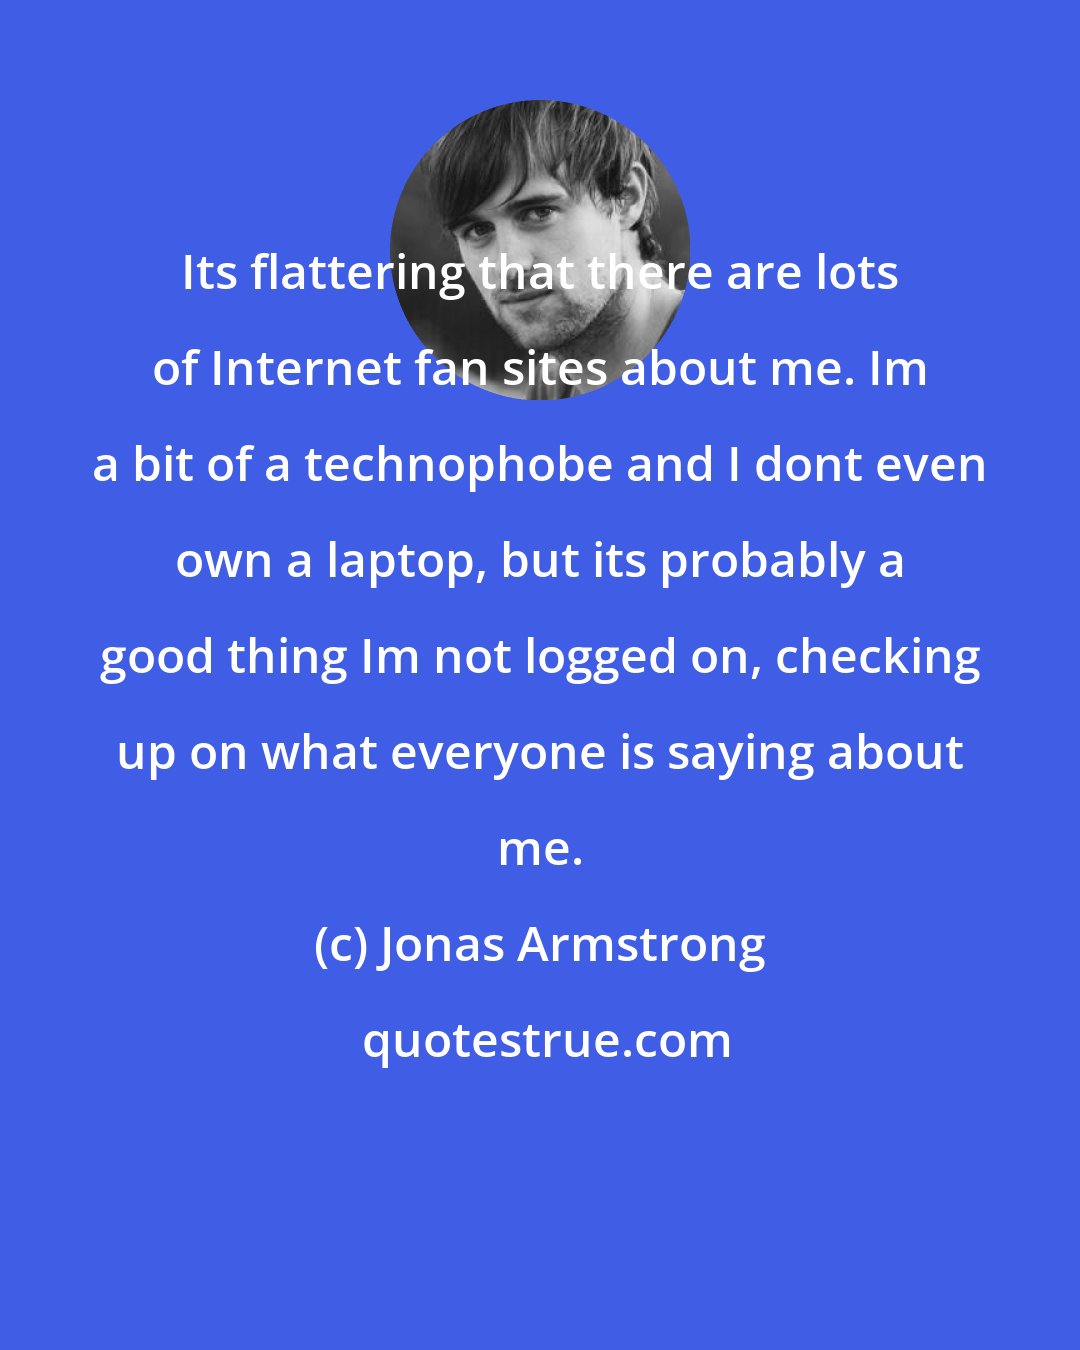 Jonas Armstrong: Its flattering that there are lots of Internet fan sites about me. Im a bit of a technophobe and I dont even own a laptop, but its probably a good thing Im not logged on, checking up on what everyone is saying about me.